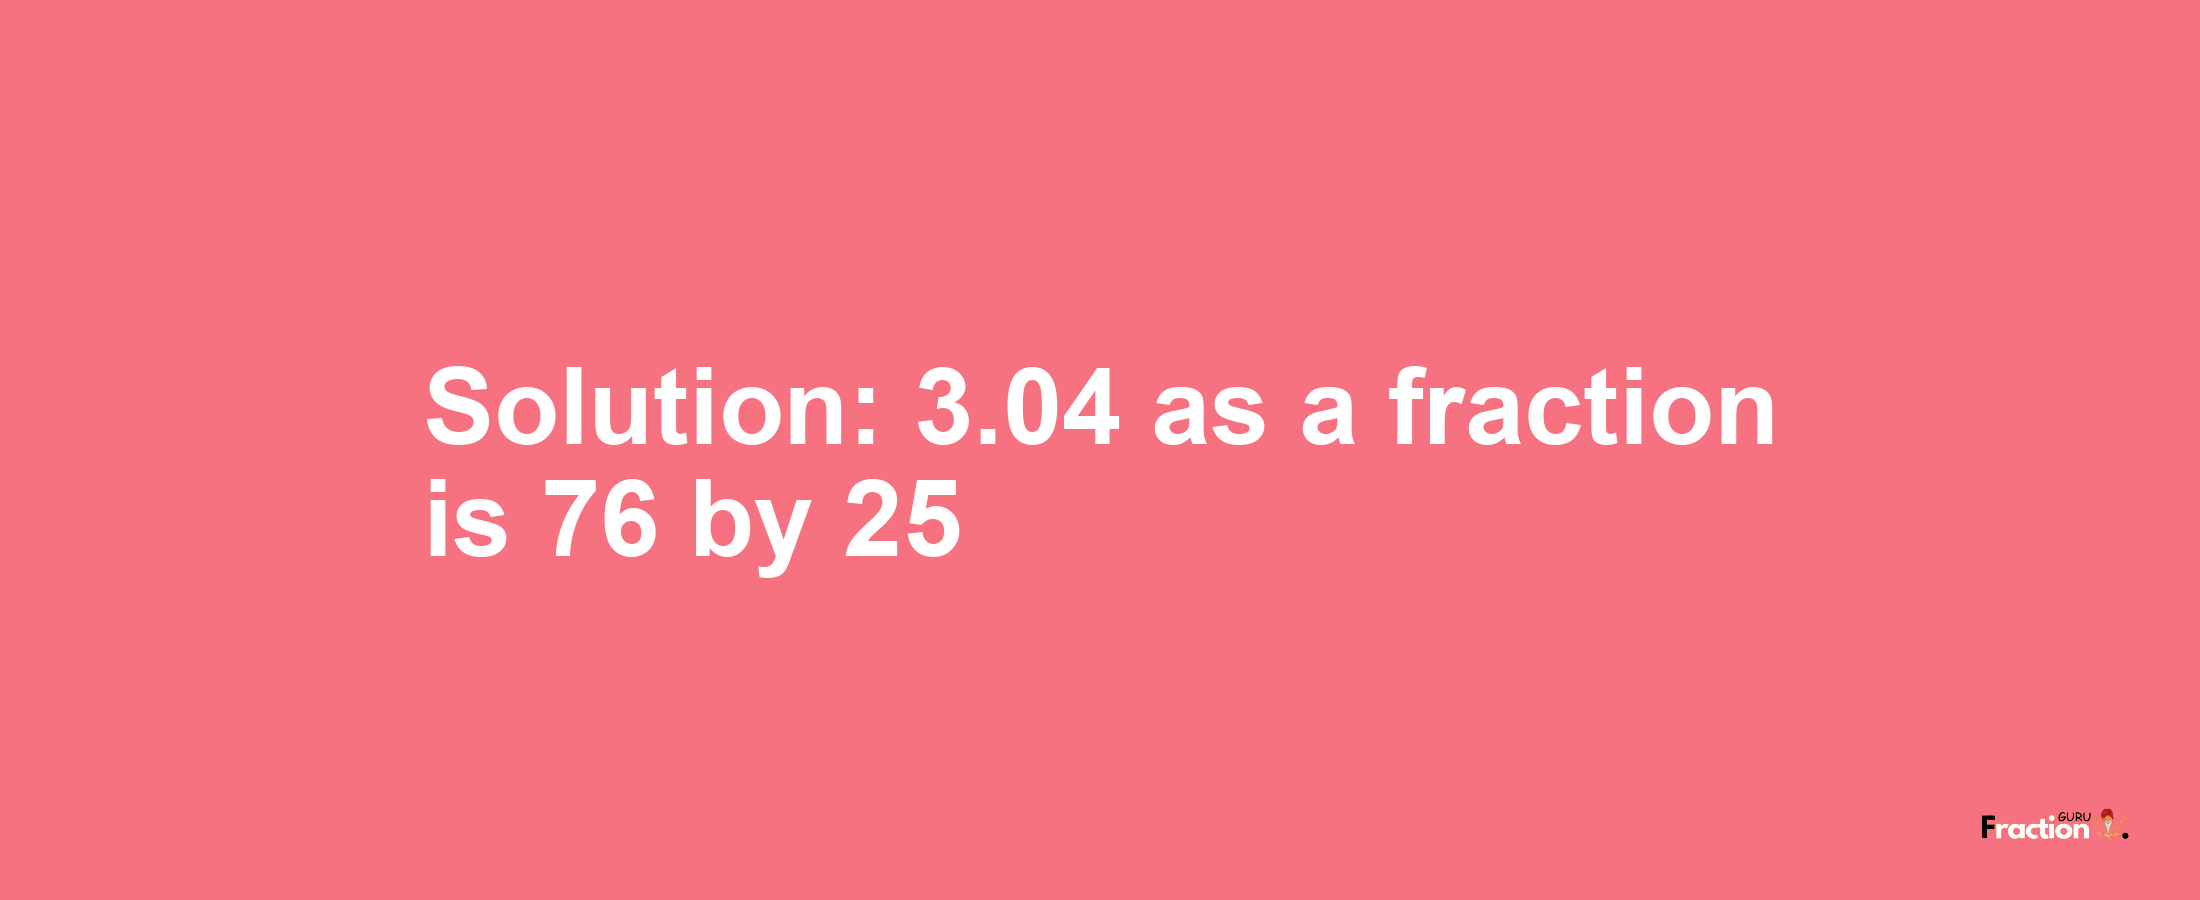 Solution:3.04 as a fraction is 76/25